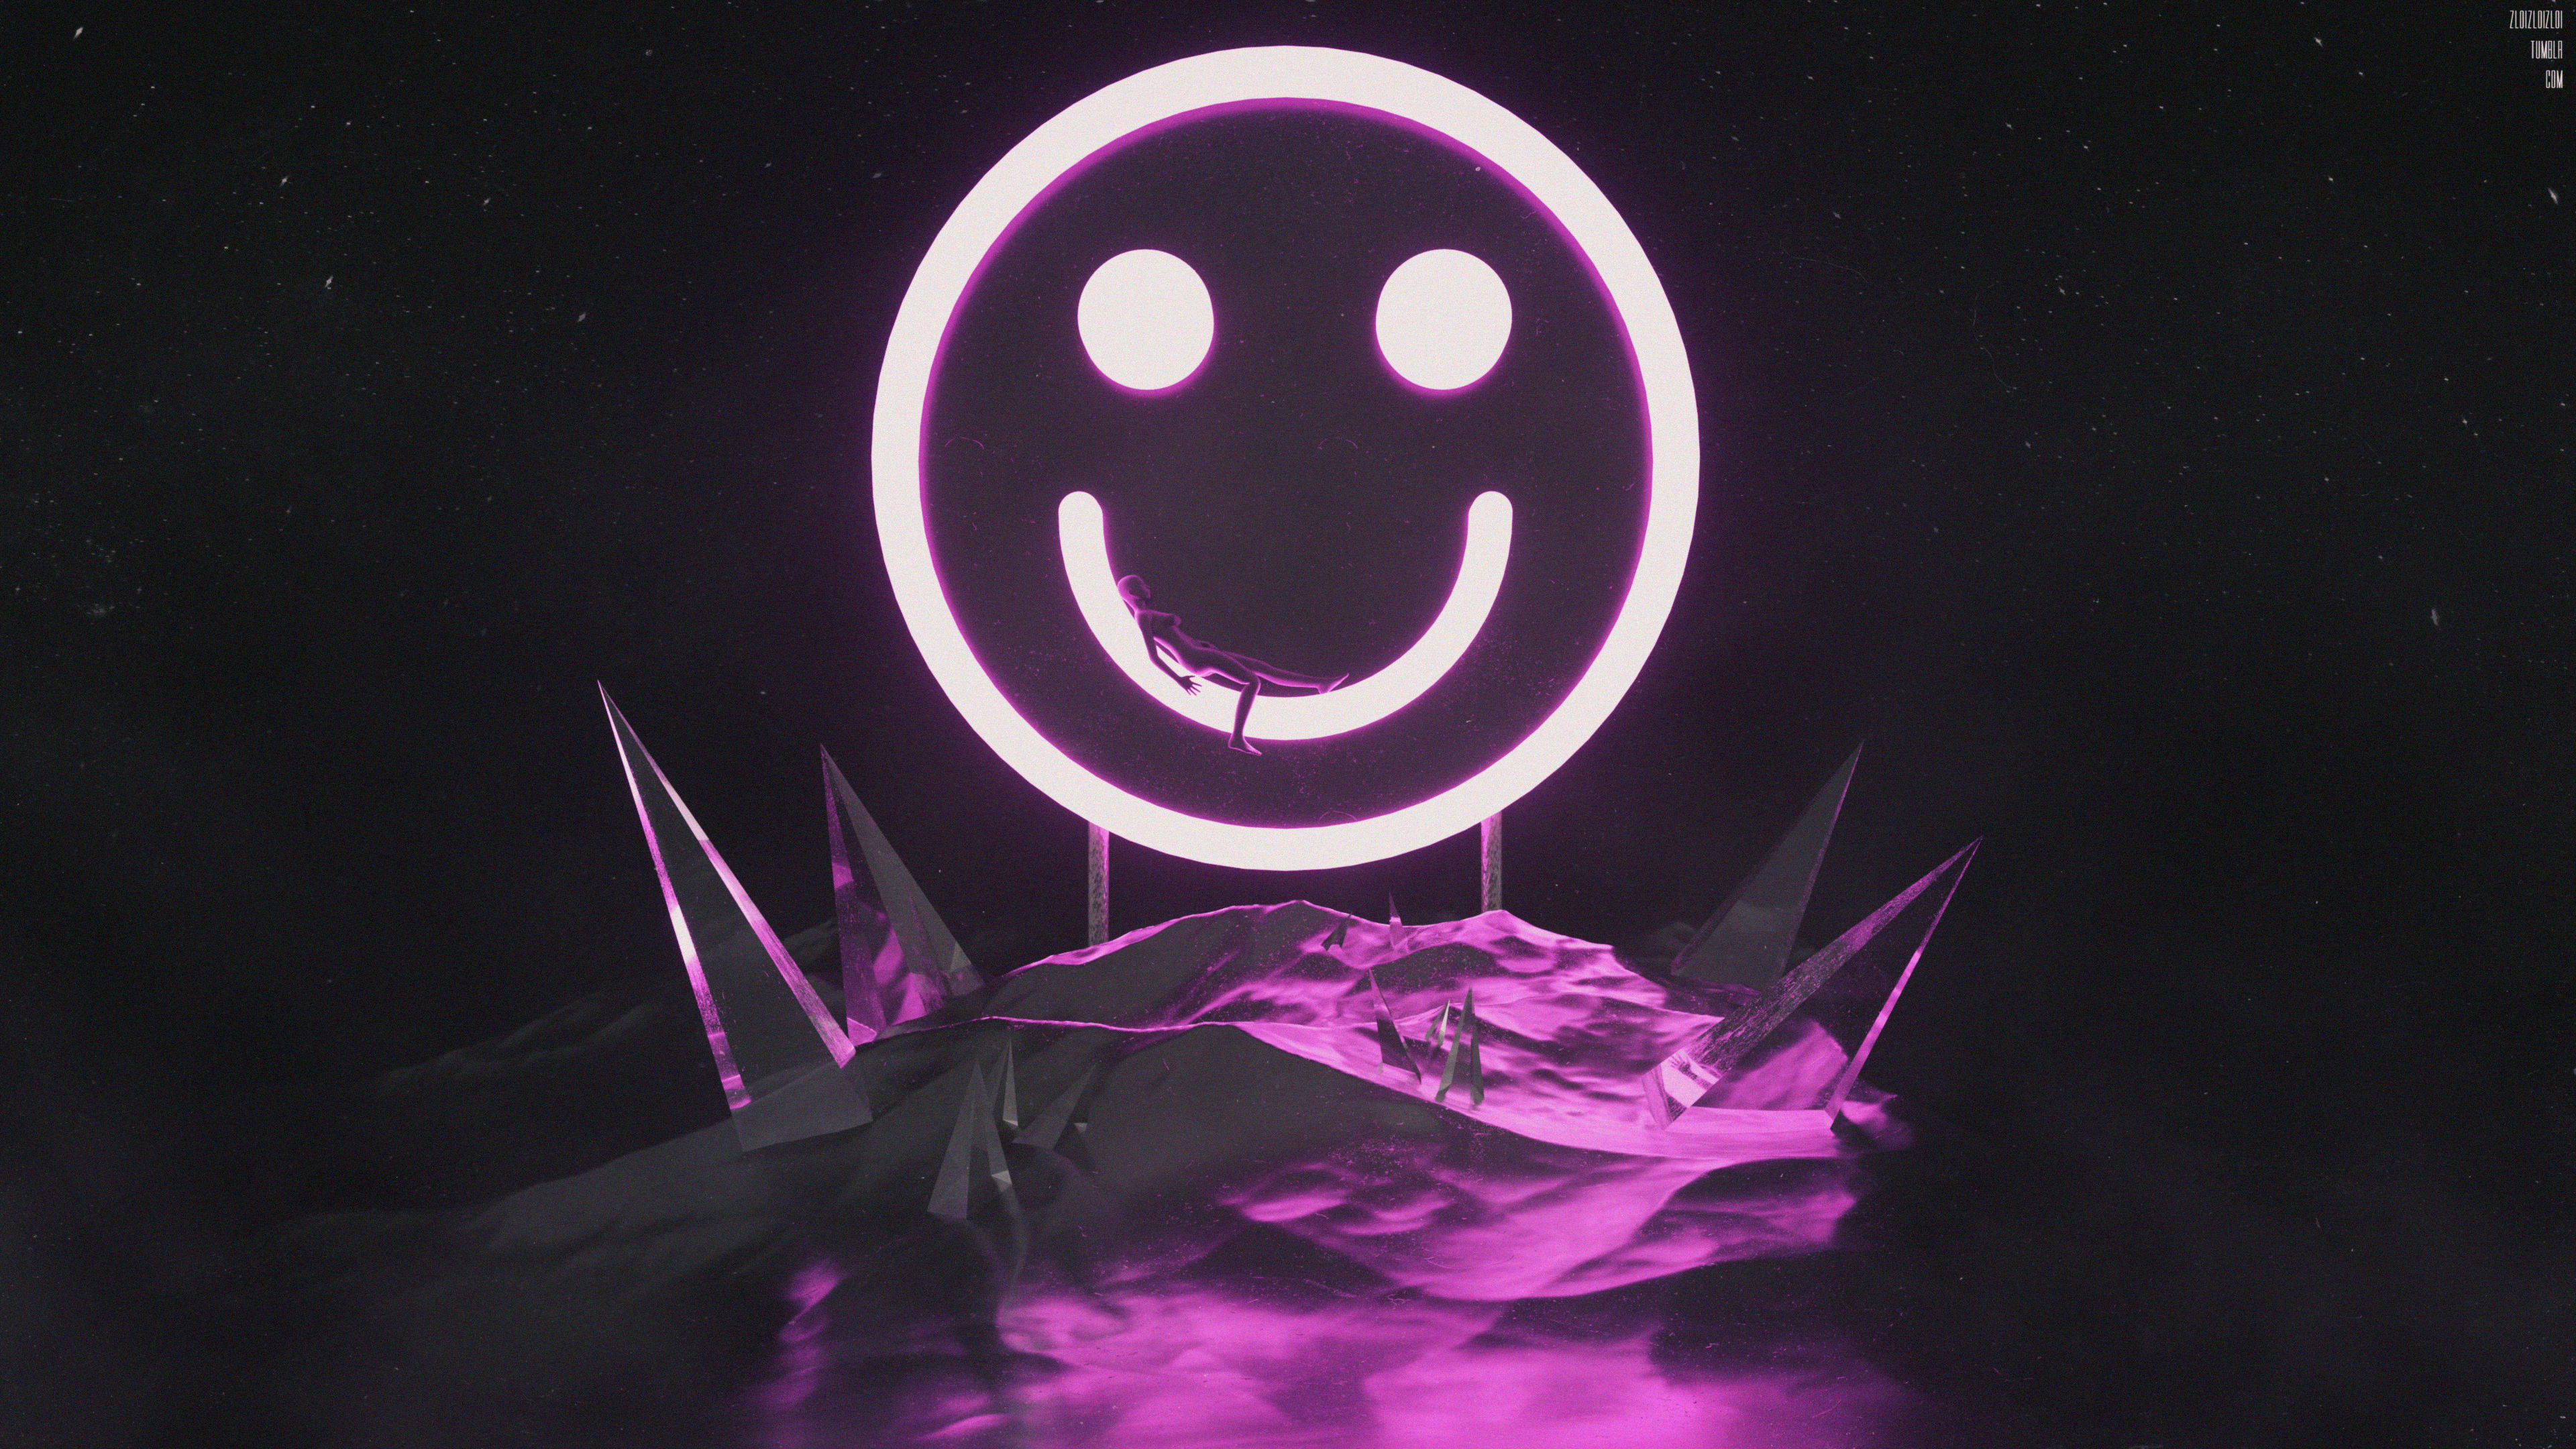 Cinema 4D Smiley Smiling Neon 3D Graphics 3D Abstract Crystal 3840x2160